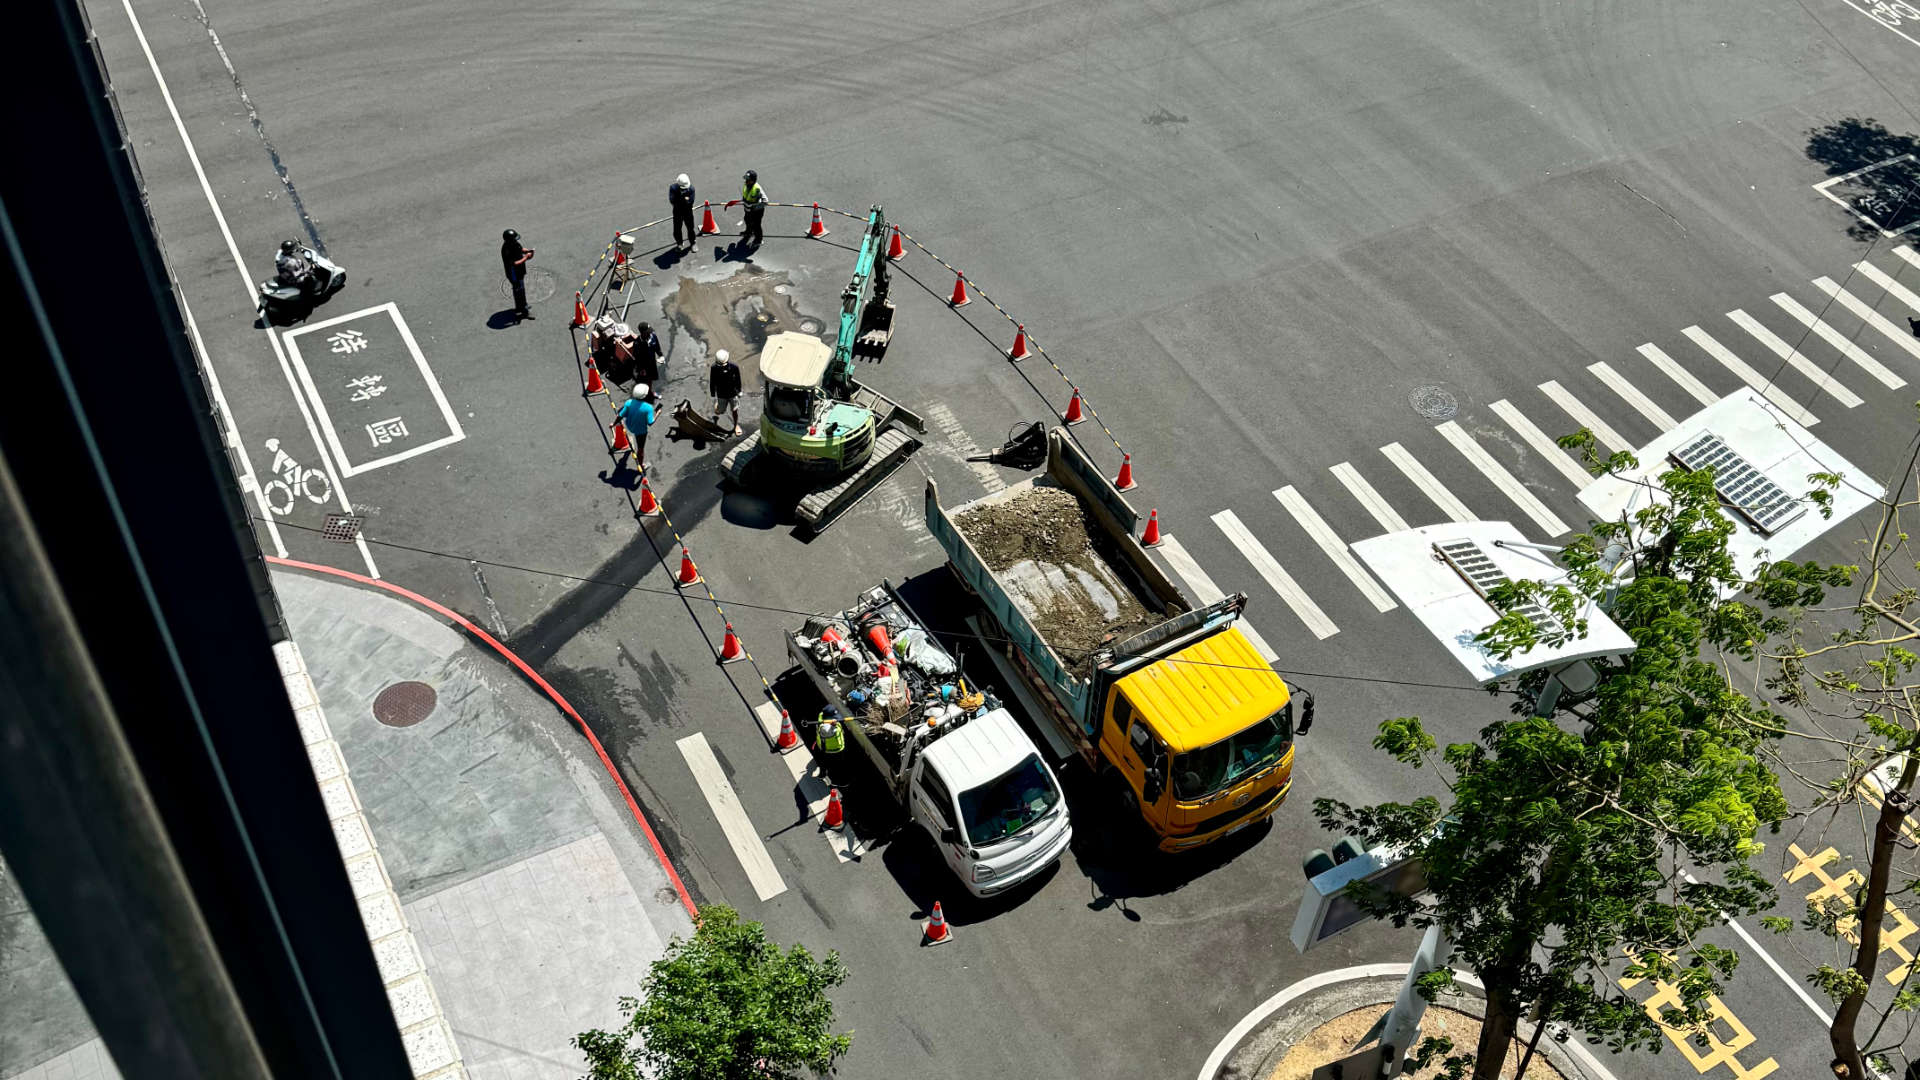 Construction crew repairing a broken water pipe at a six-lane intersection in Kaohsiung, Taiwan.